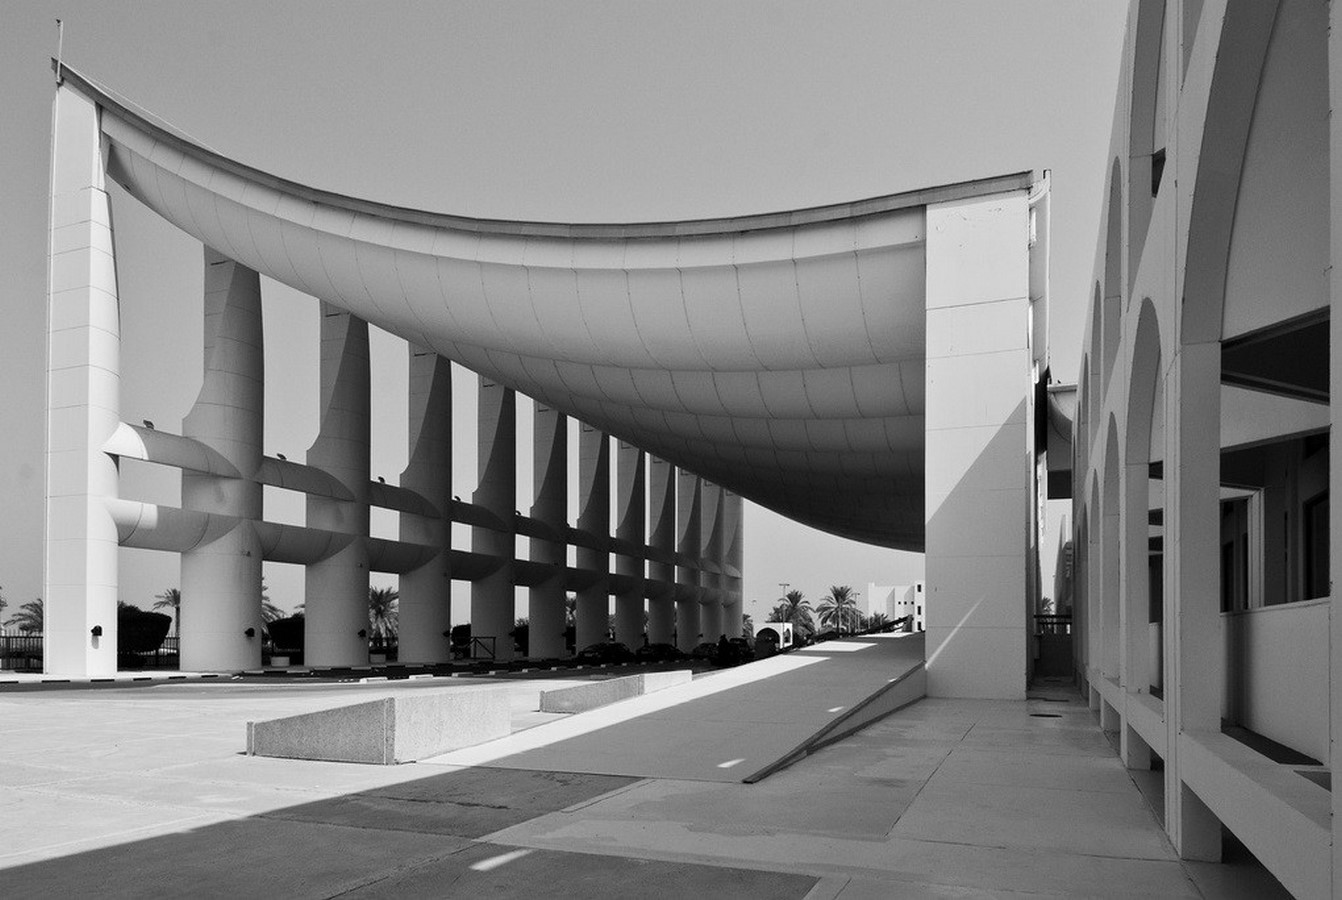 Kuwait National Assembly Building by Jørn Utzon: Architecture inspired from Bazaars - Sheet10